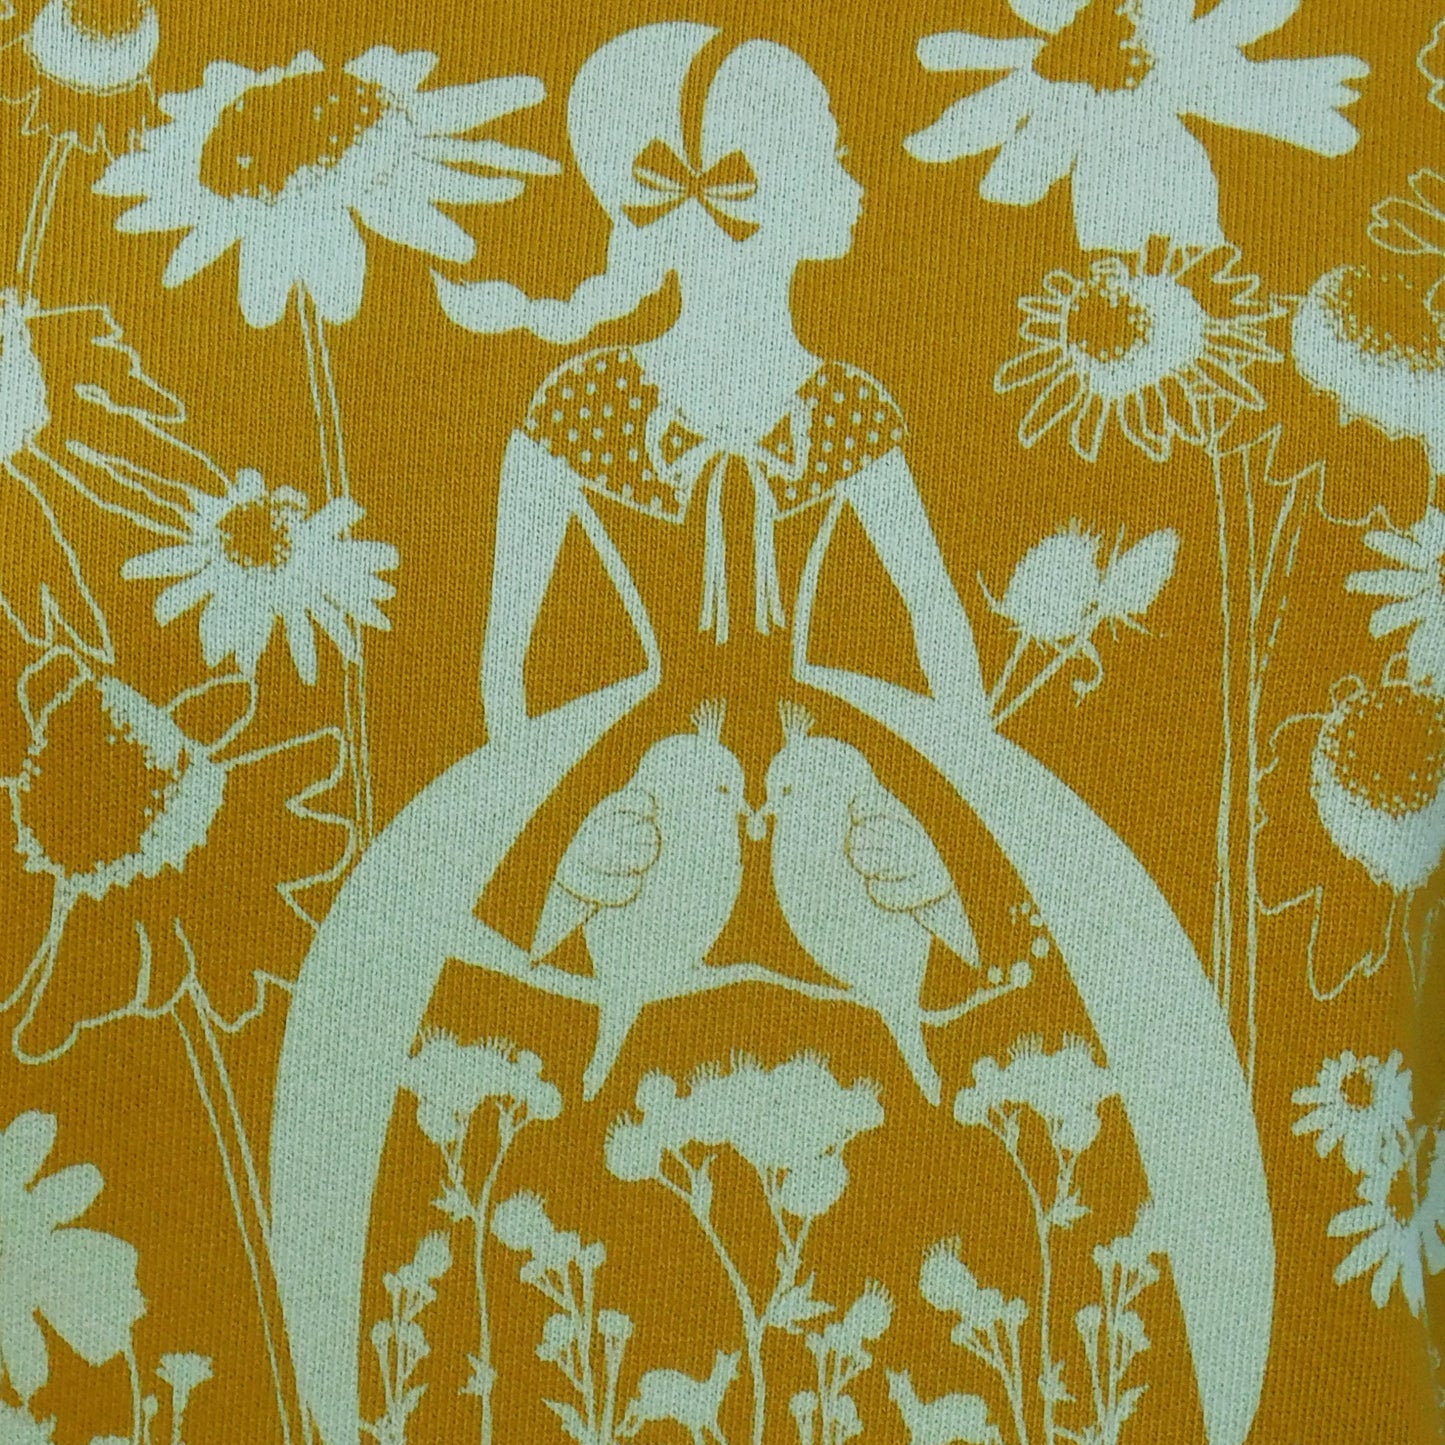 Closeup of screenprint of yellow shirt with white print of girl surrounded by daisies and birds